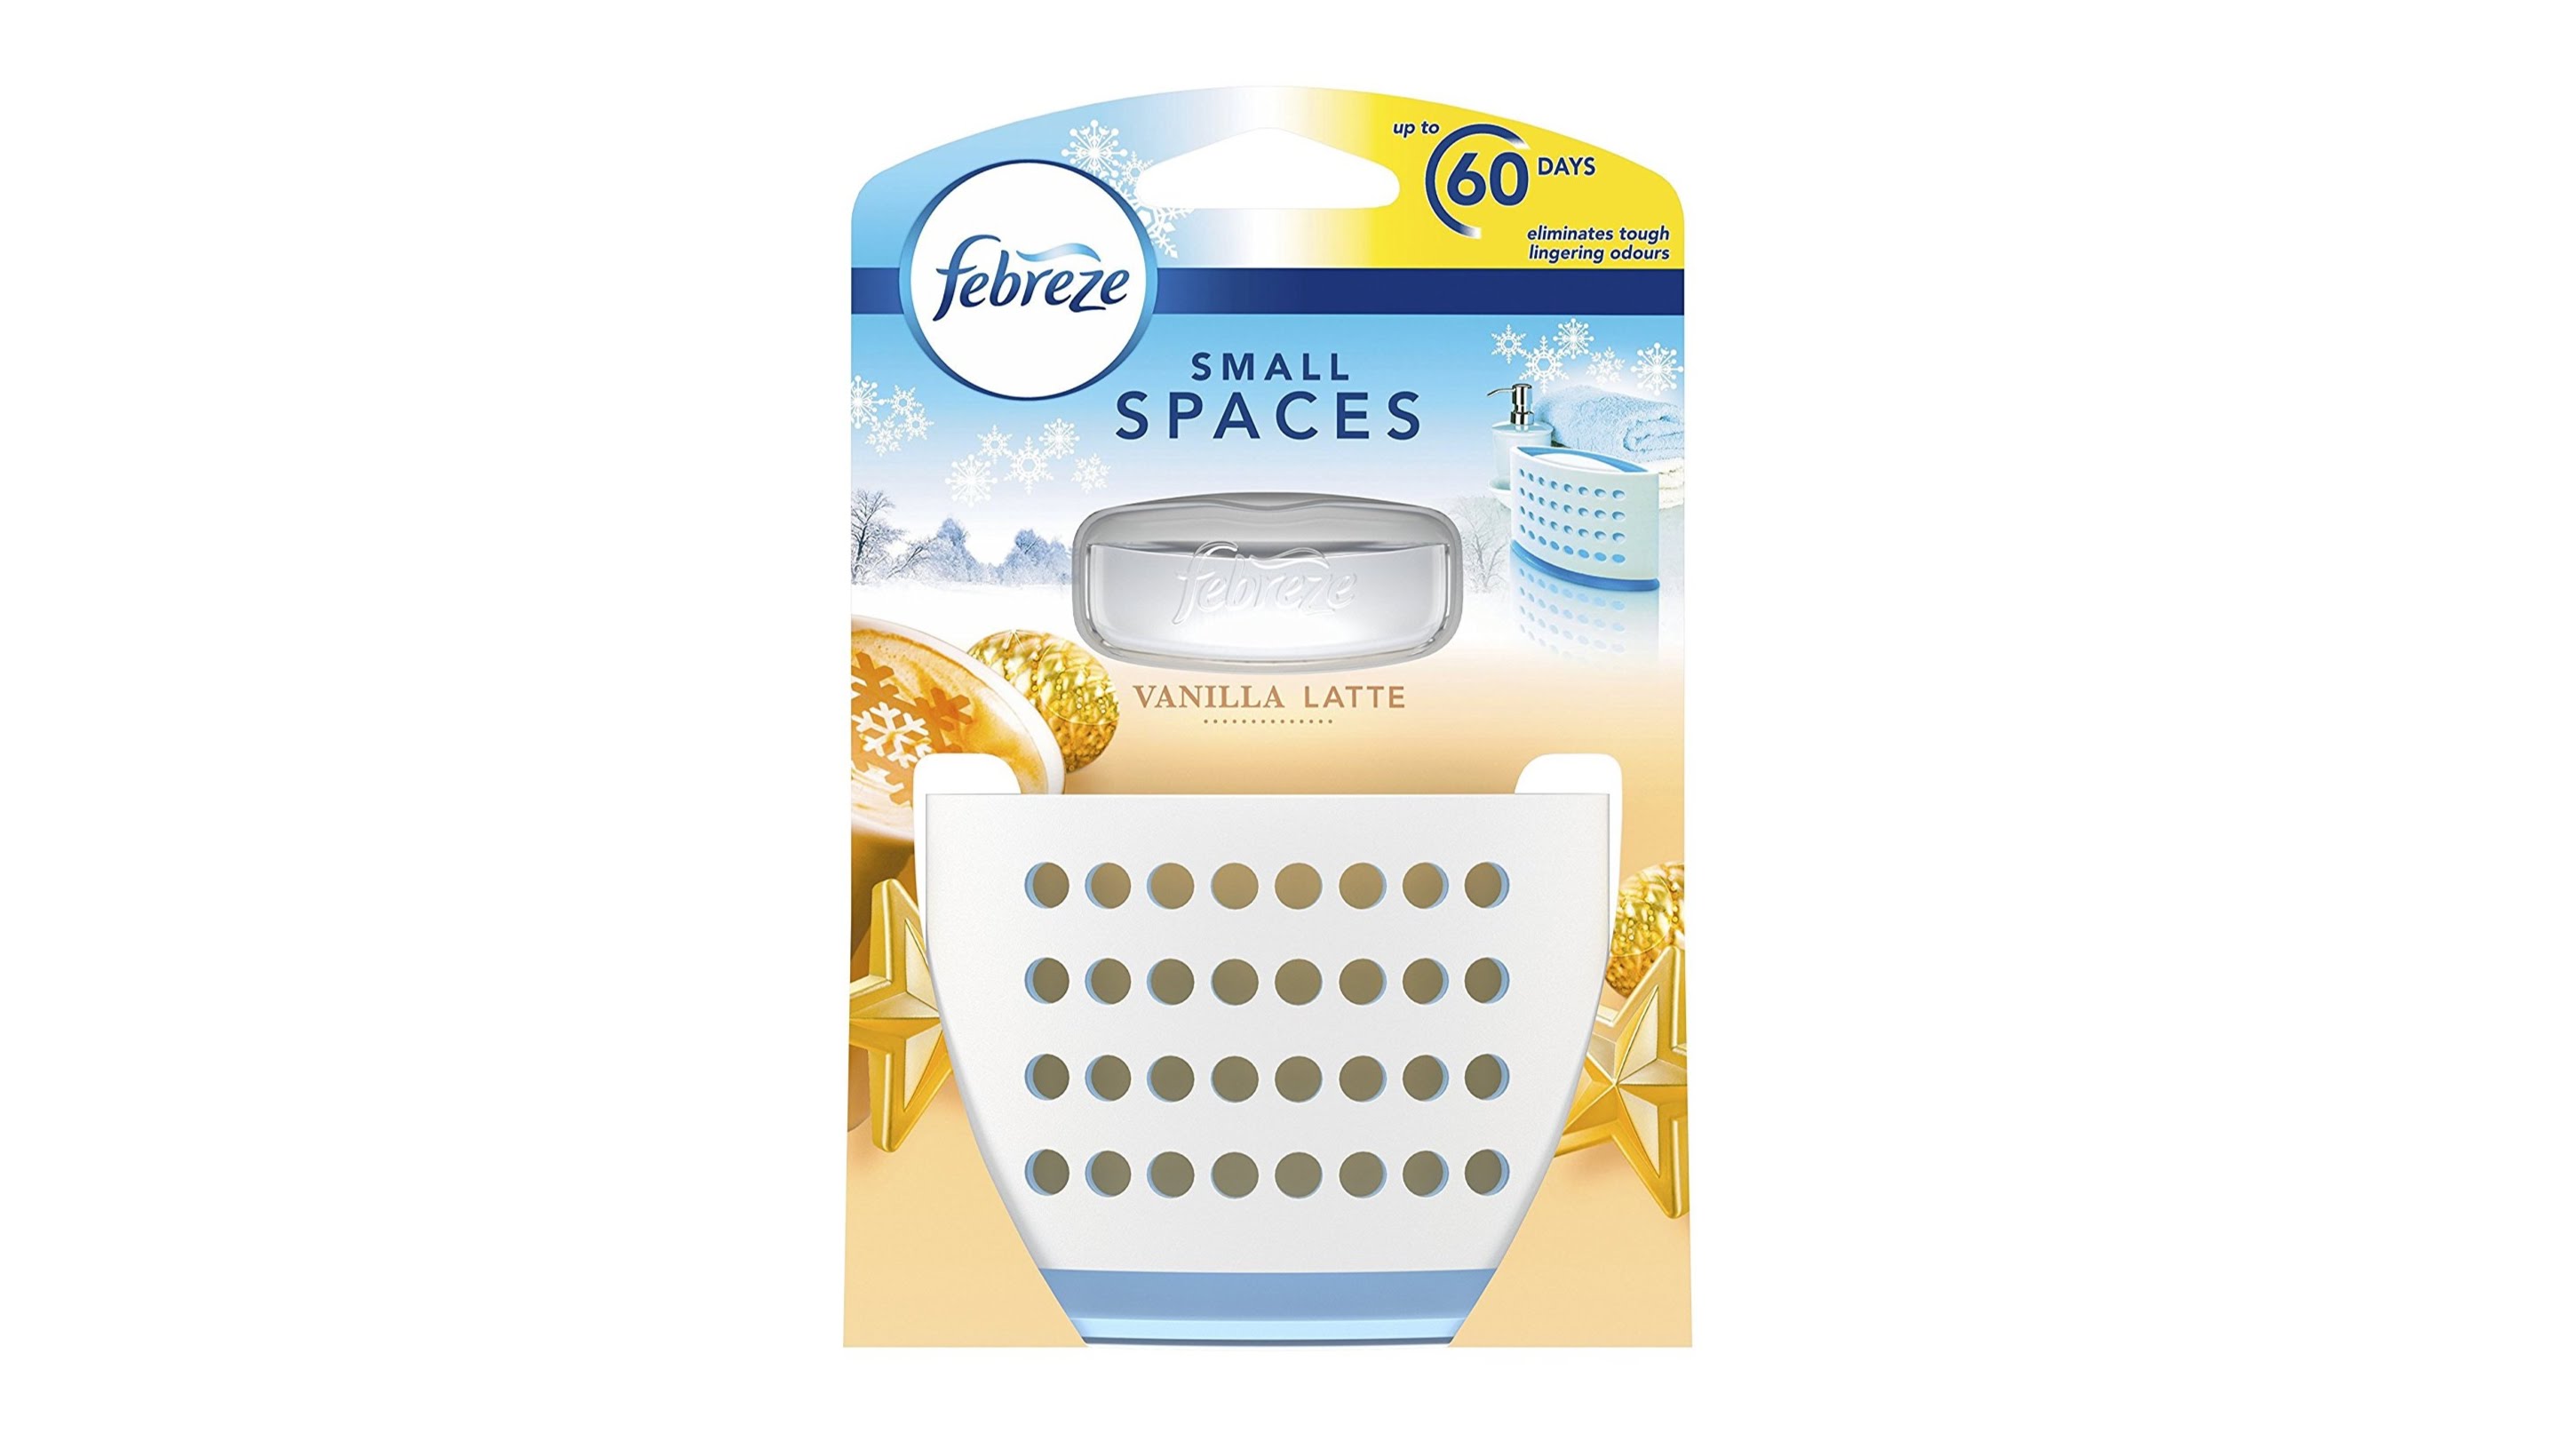 Best air freshener for small homes: Febreeze Vanilla Latte small spaces air freshener